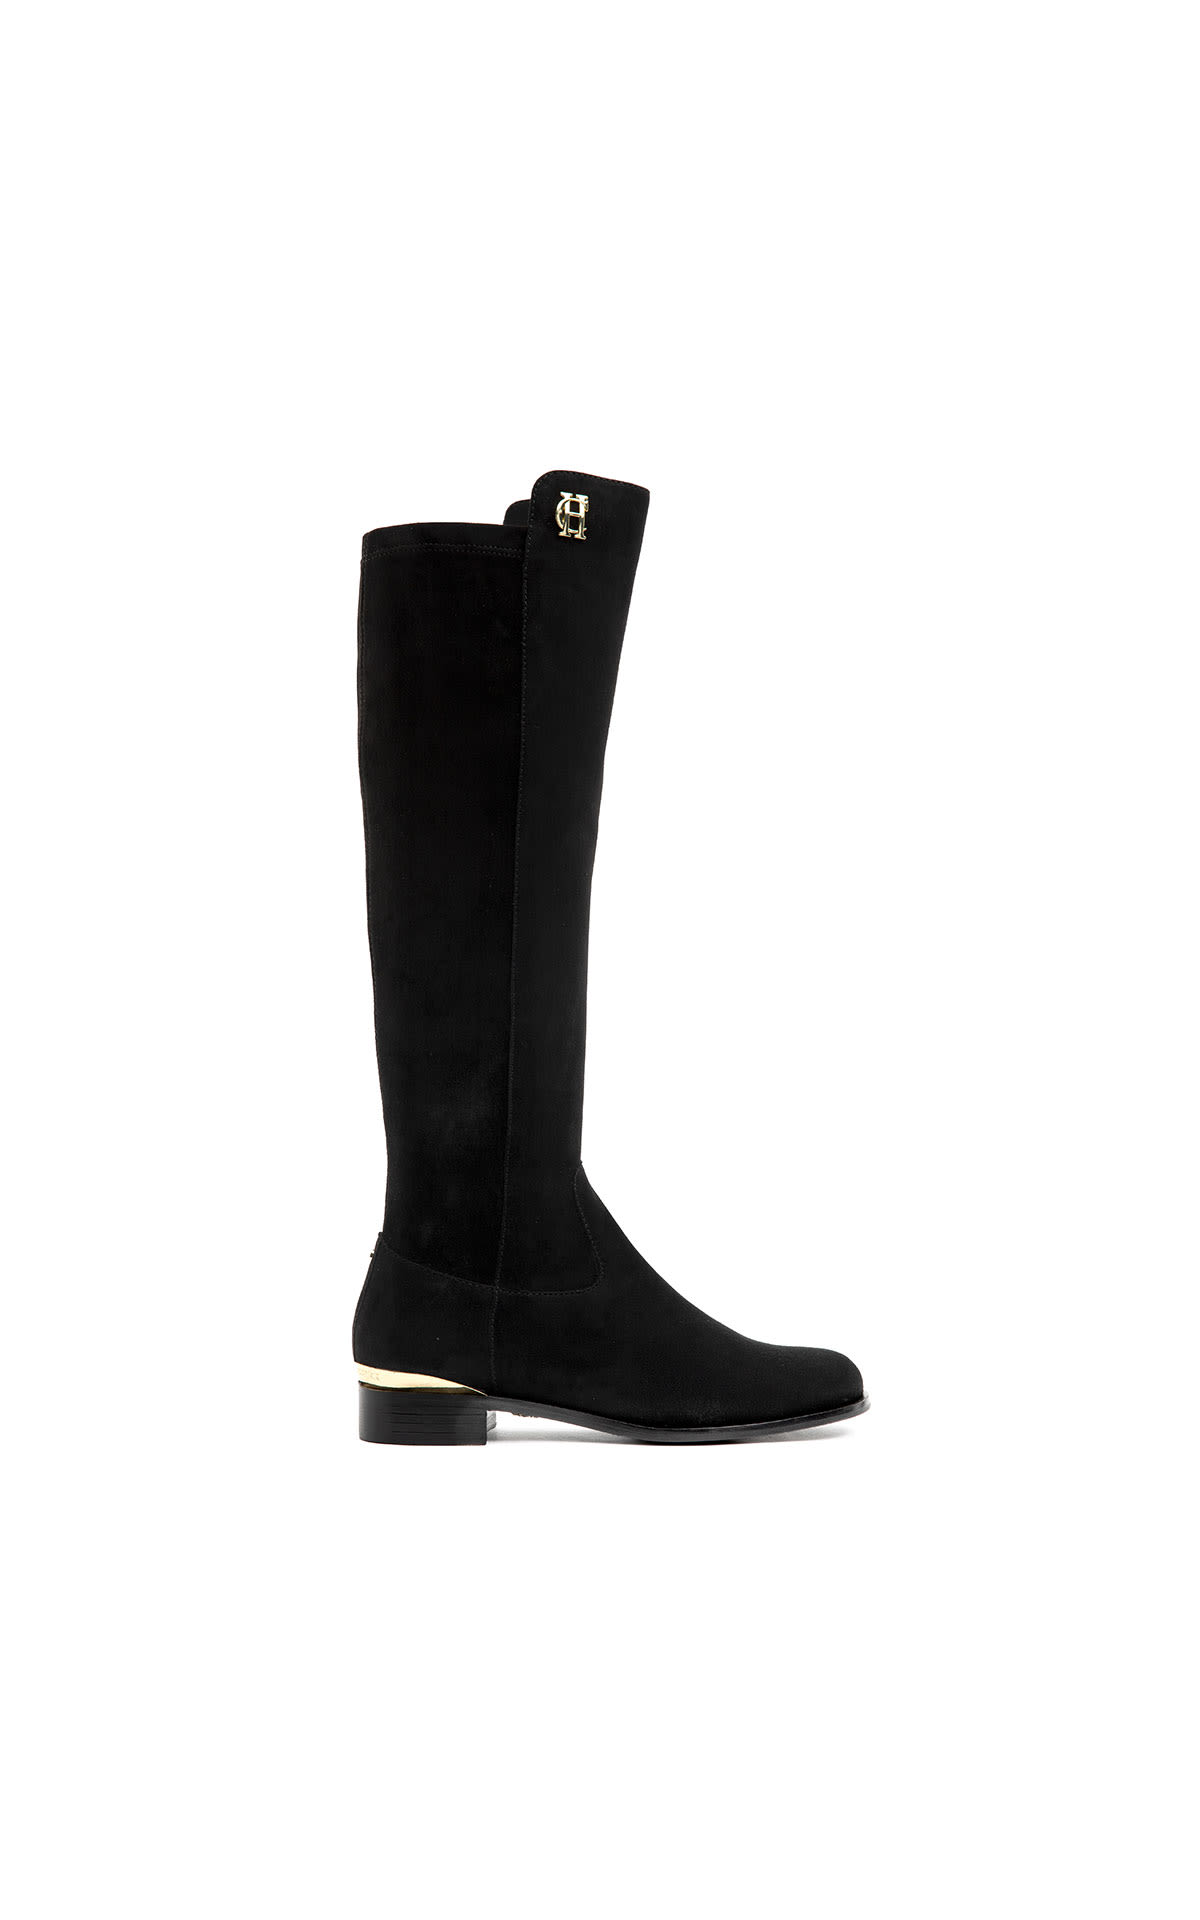 Holland Cooper Albany knee boot from Bicester Village